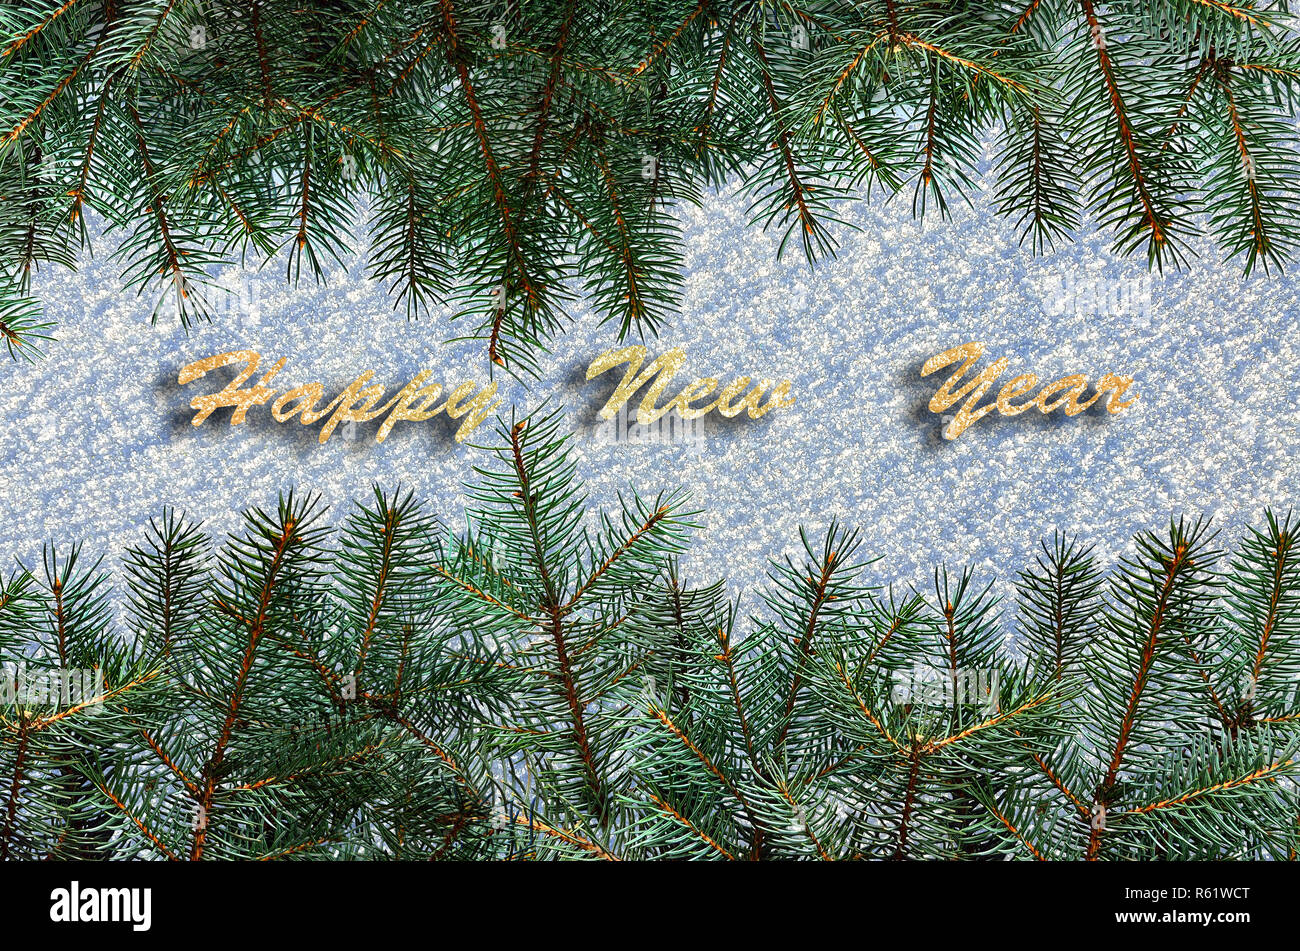 Festive background with green fir tree branches over snow surface and text Happy New Year - greeting card or party invitation template Stock Photo